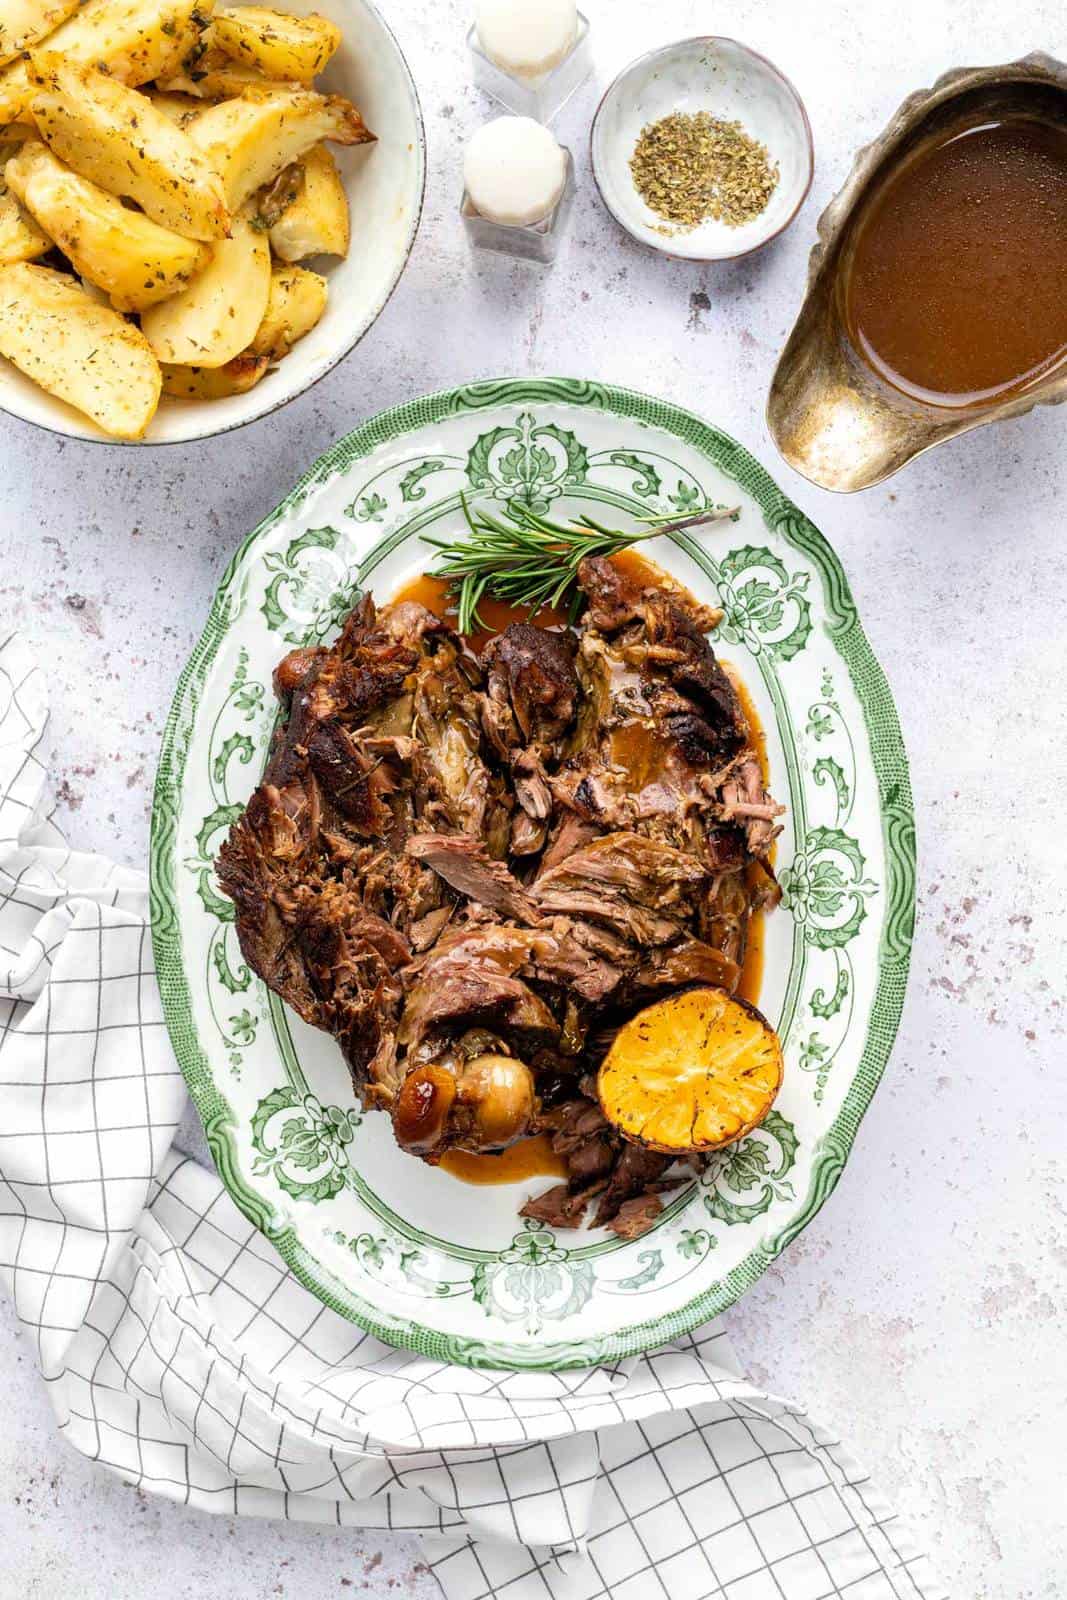 Slow Cooker Roast Lamb, shredded and served on a platter with gravy and roast potatoes on the side